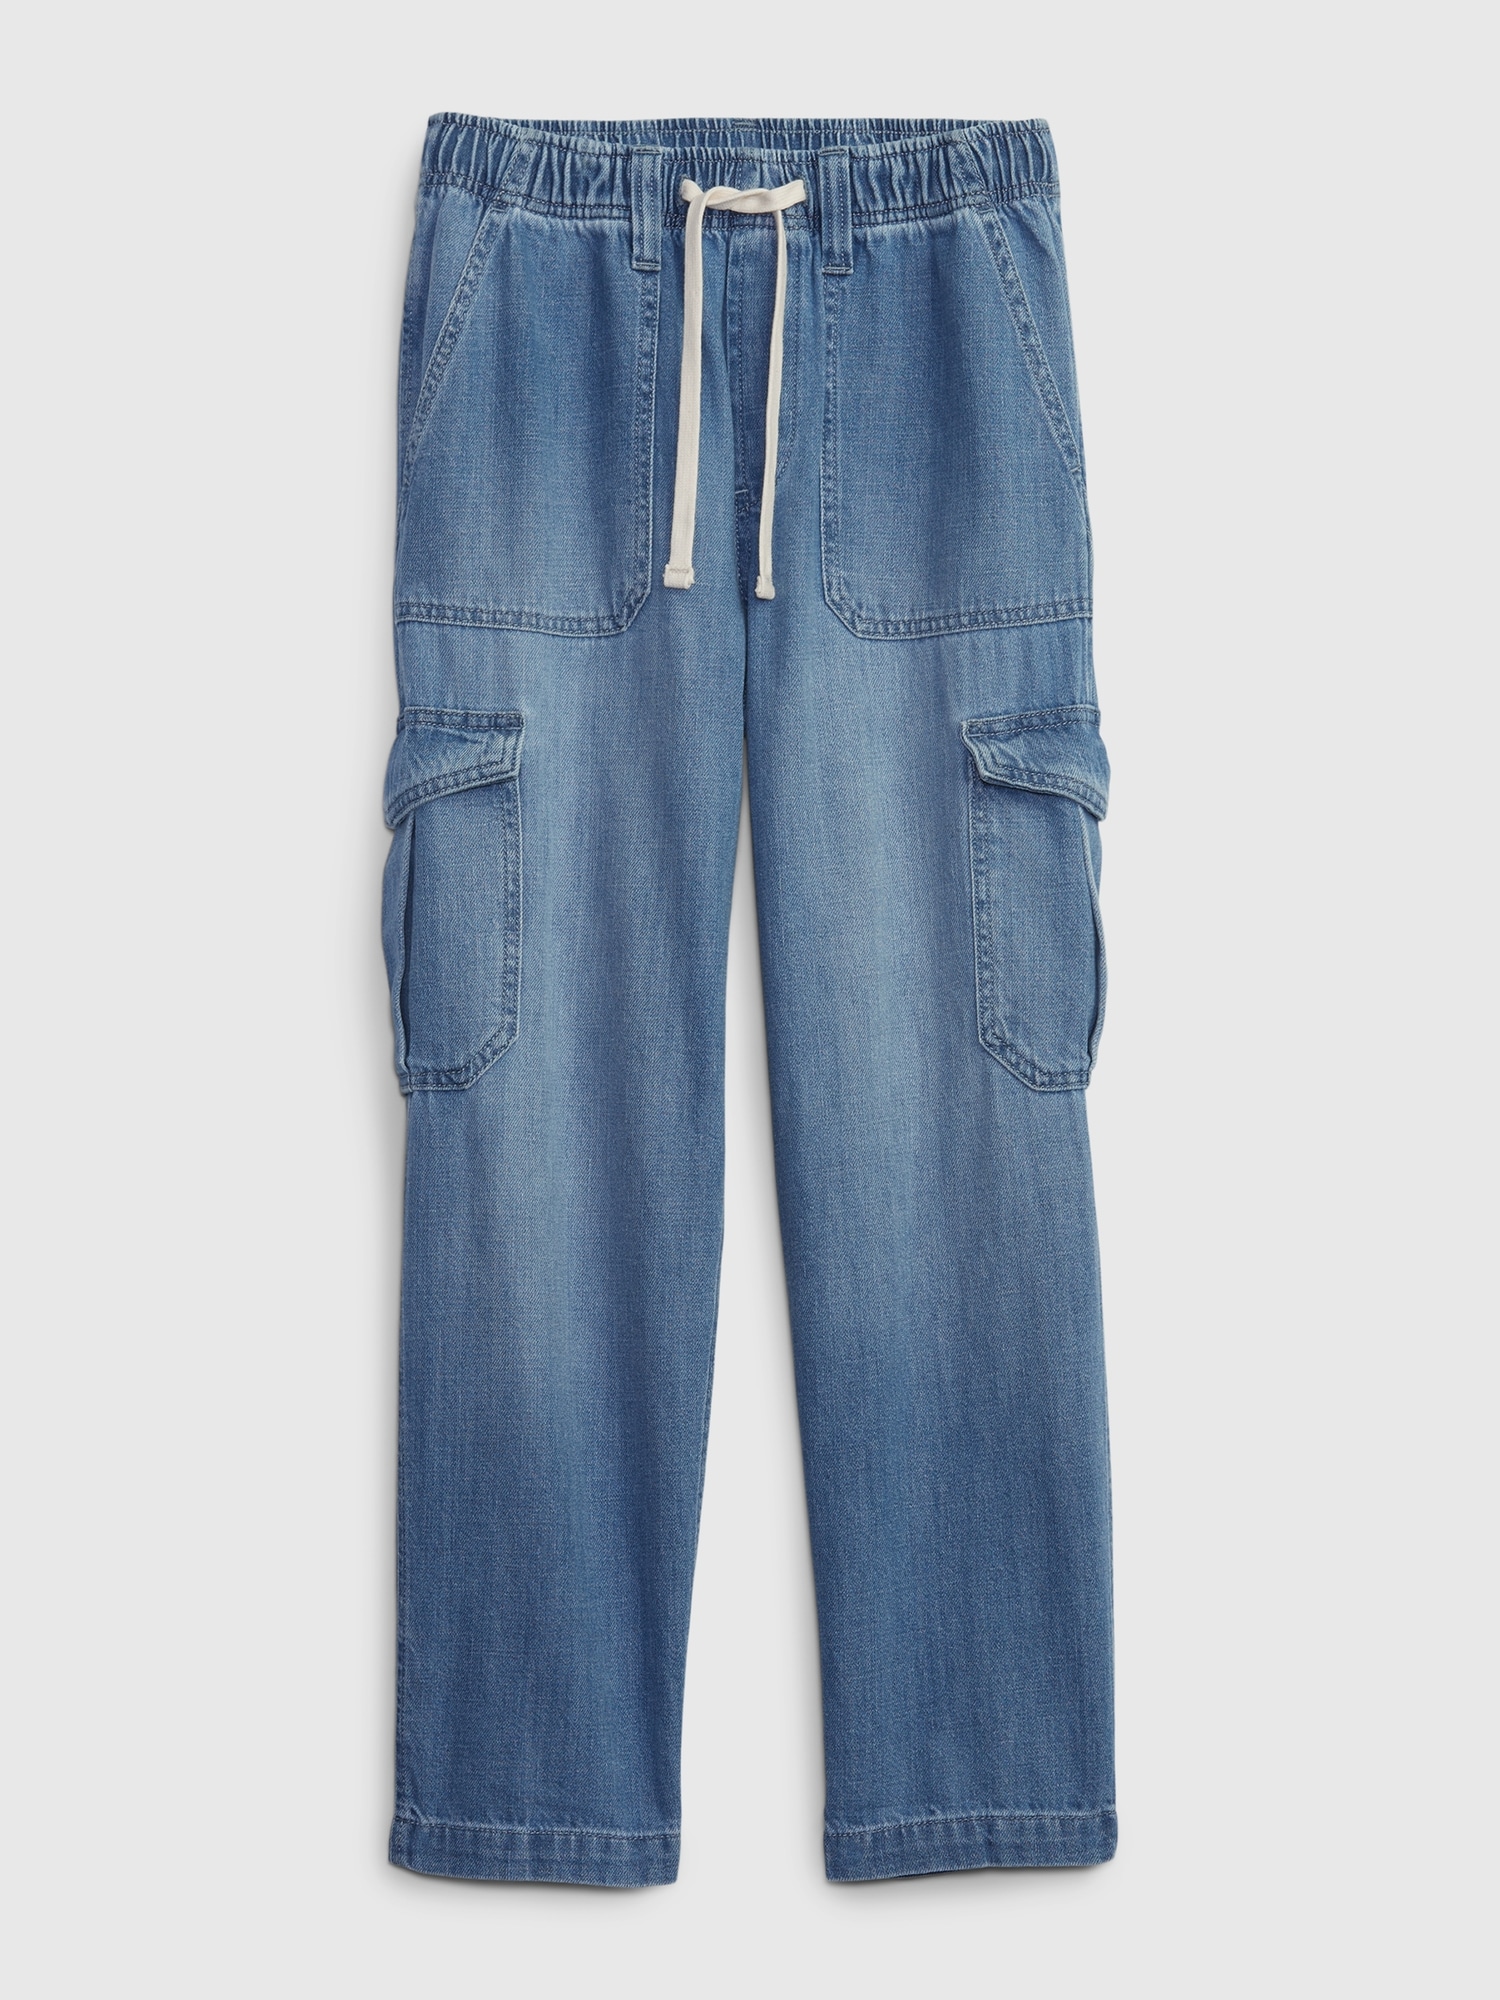 Relaxed Fit Cargo Denim Look Sweatpants